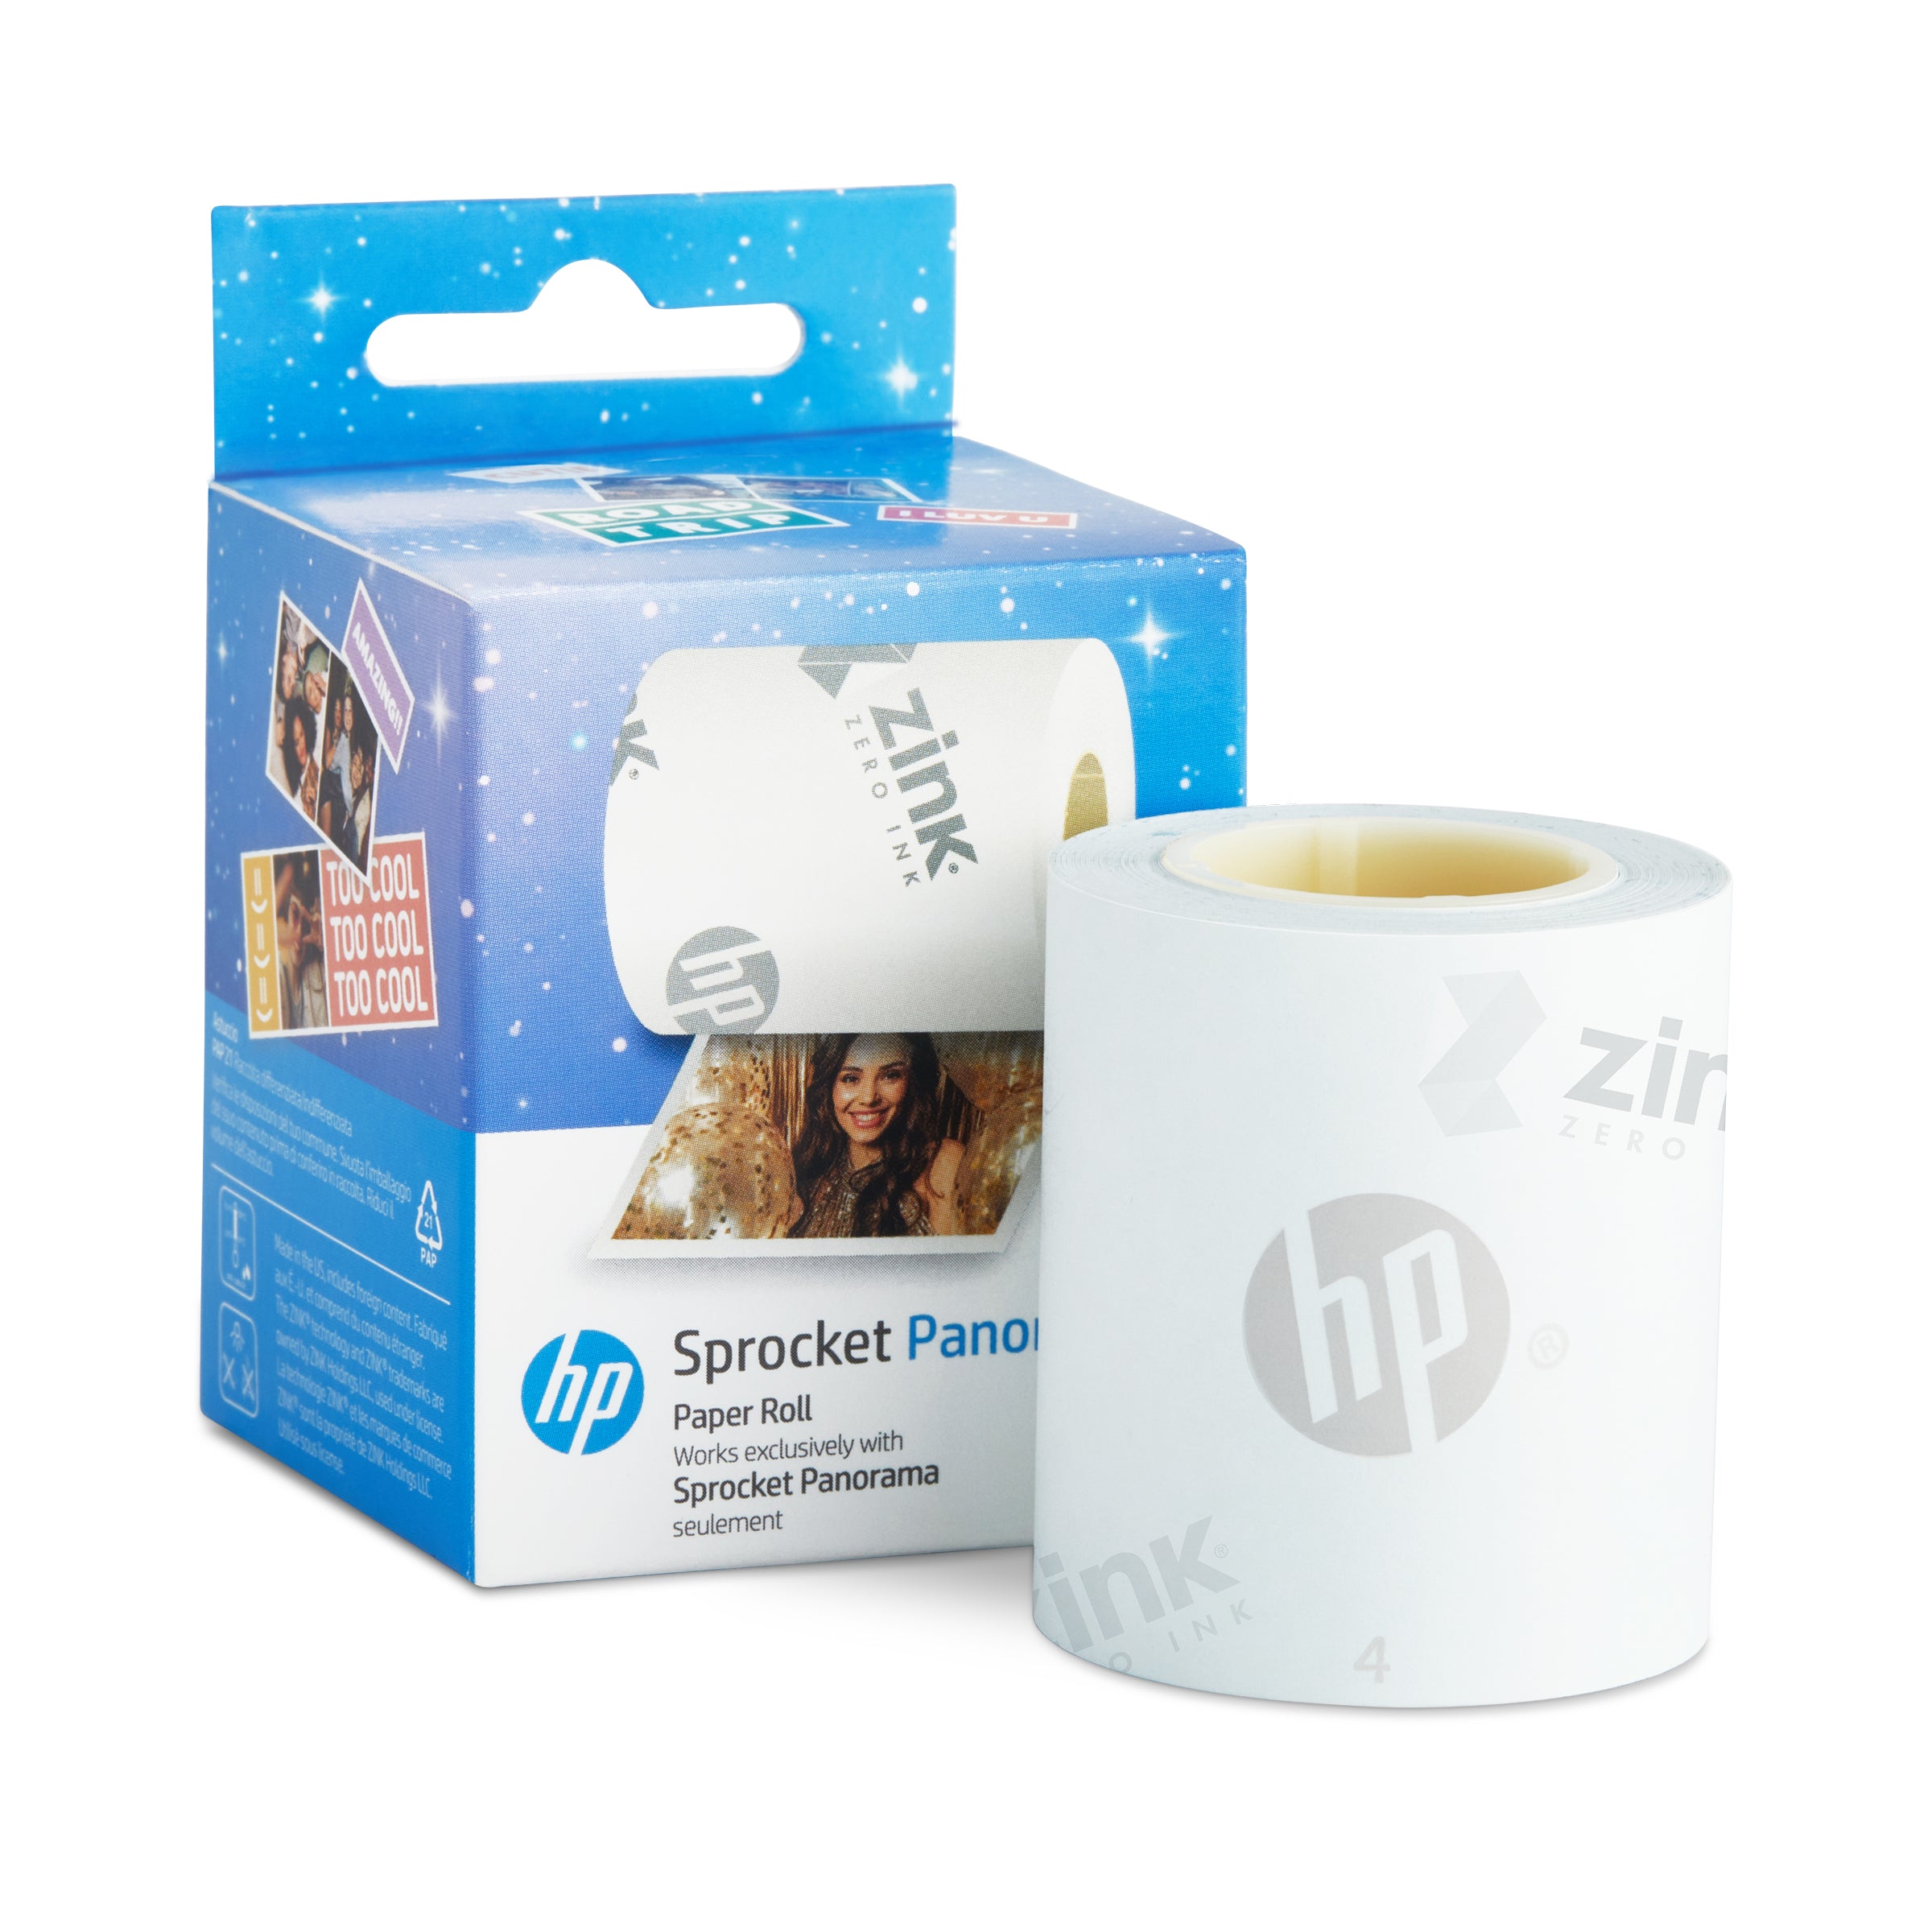 HP Sprocket Panorama Instant Portable Color Label & Photo Printer (Grey) Gift Bundle with case, HP Zink roll, photo album, markers, stickers and frames Sprocket Printers CA